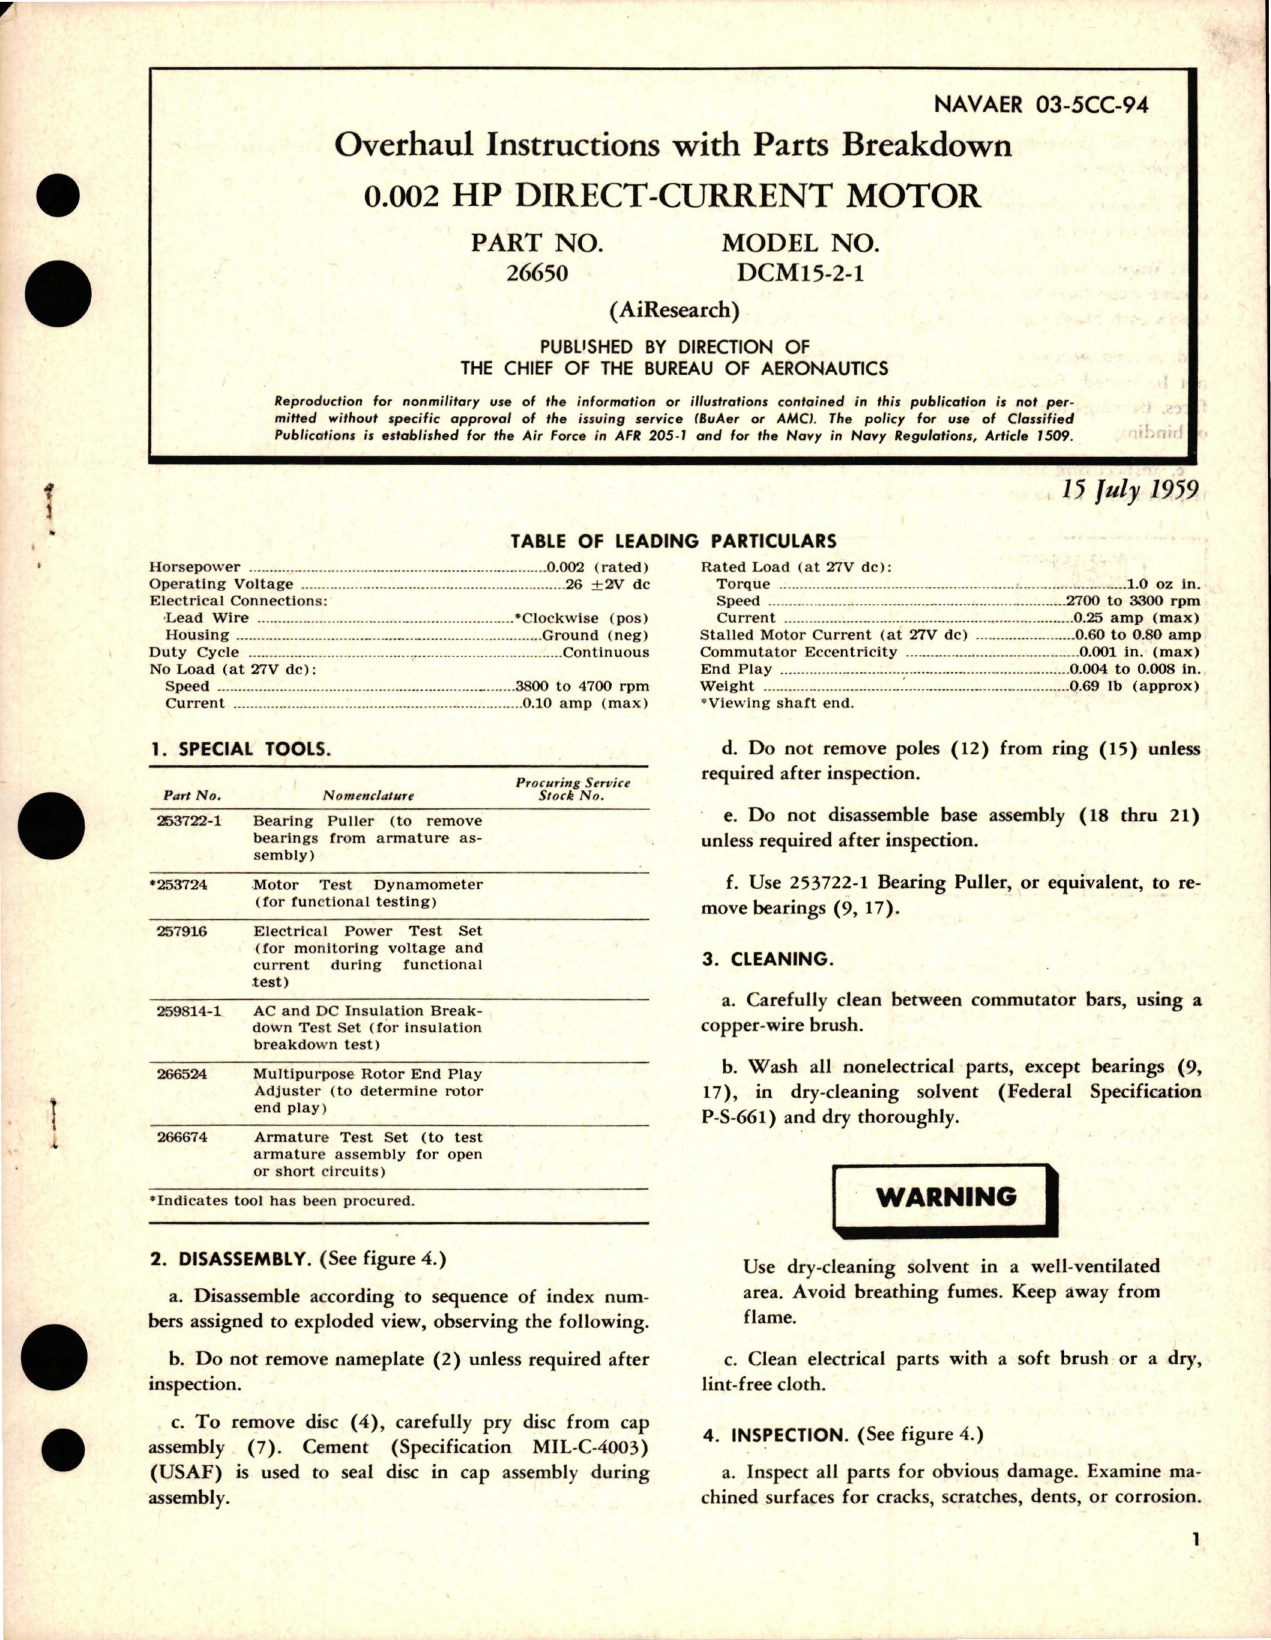 Sample page 1 from AirCorps Library document: Overhaul Instructions with Parts Breakdown for Direct-Current Motor - Part 26650 - Model DCM15-2-1